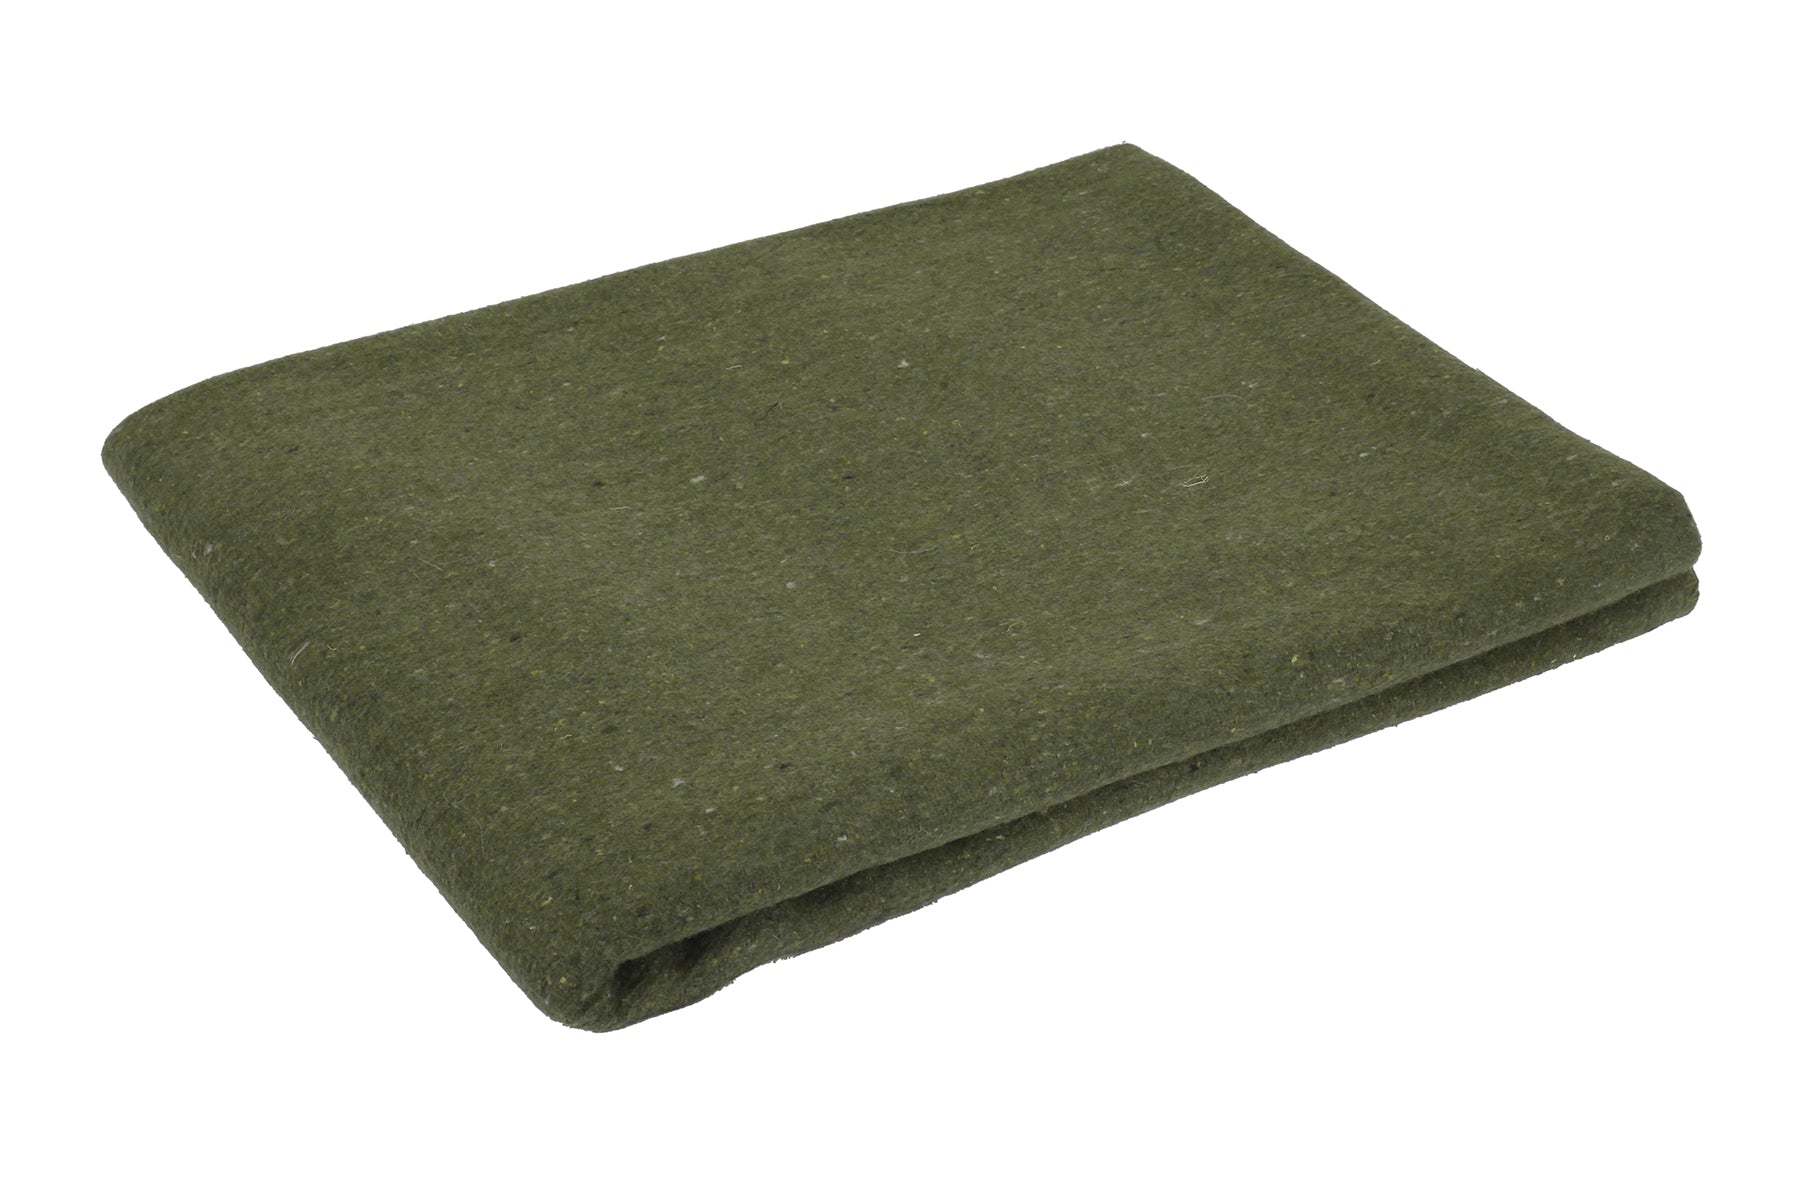  Wool Rescue Survival Blanket - Tactical Choice Plus